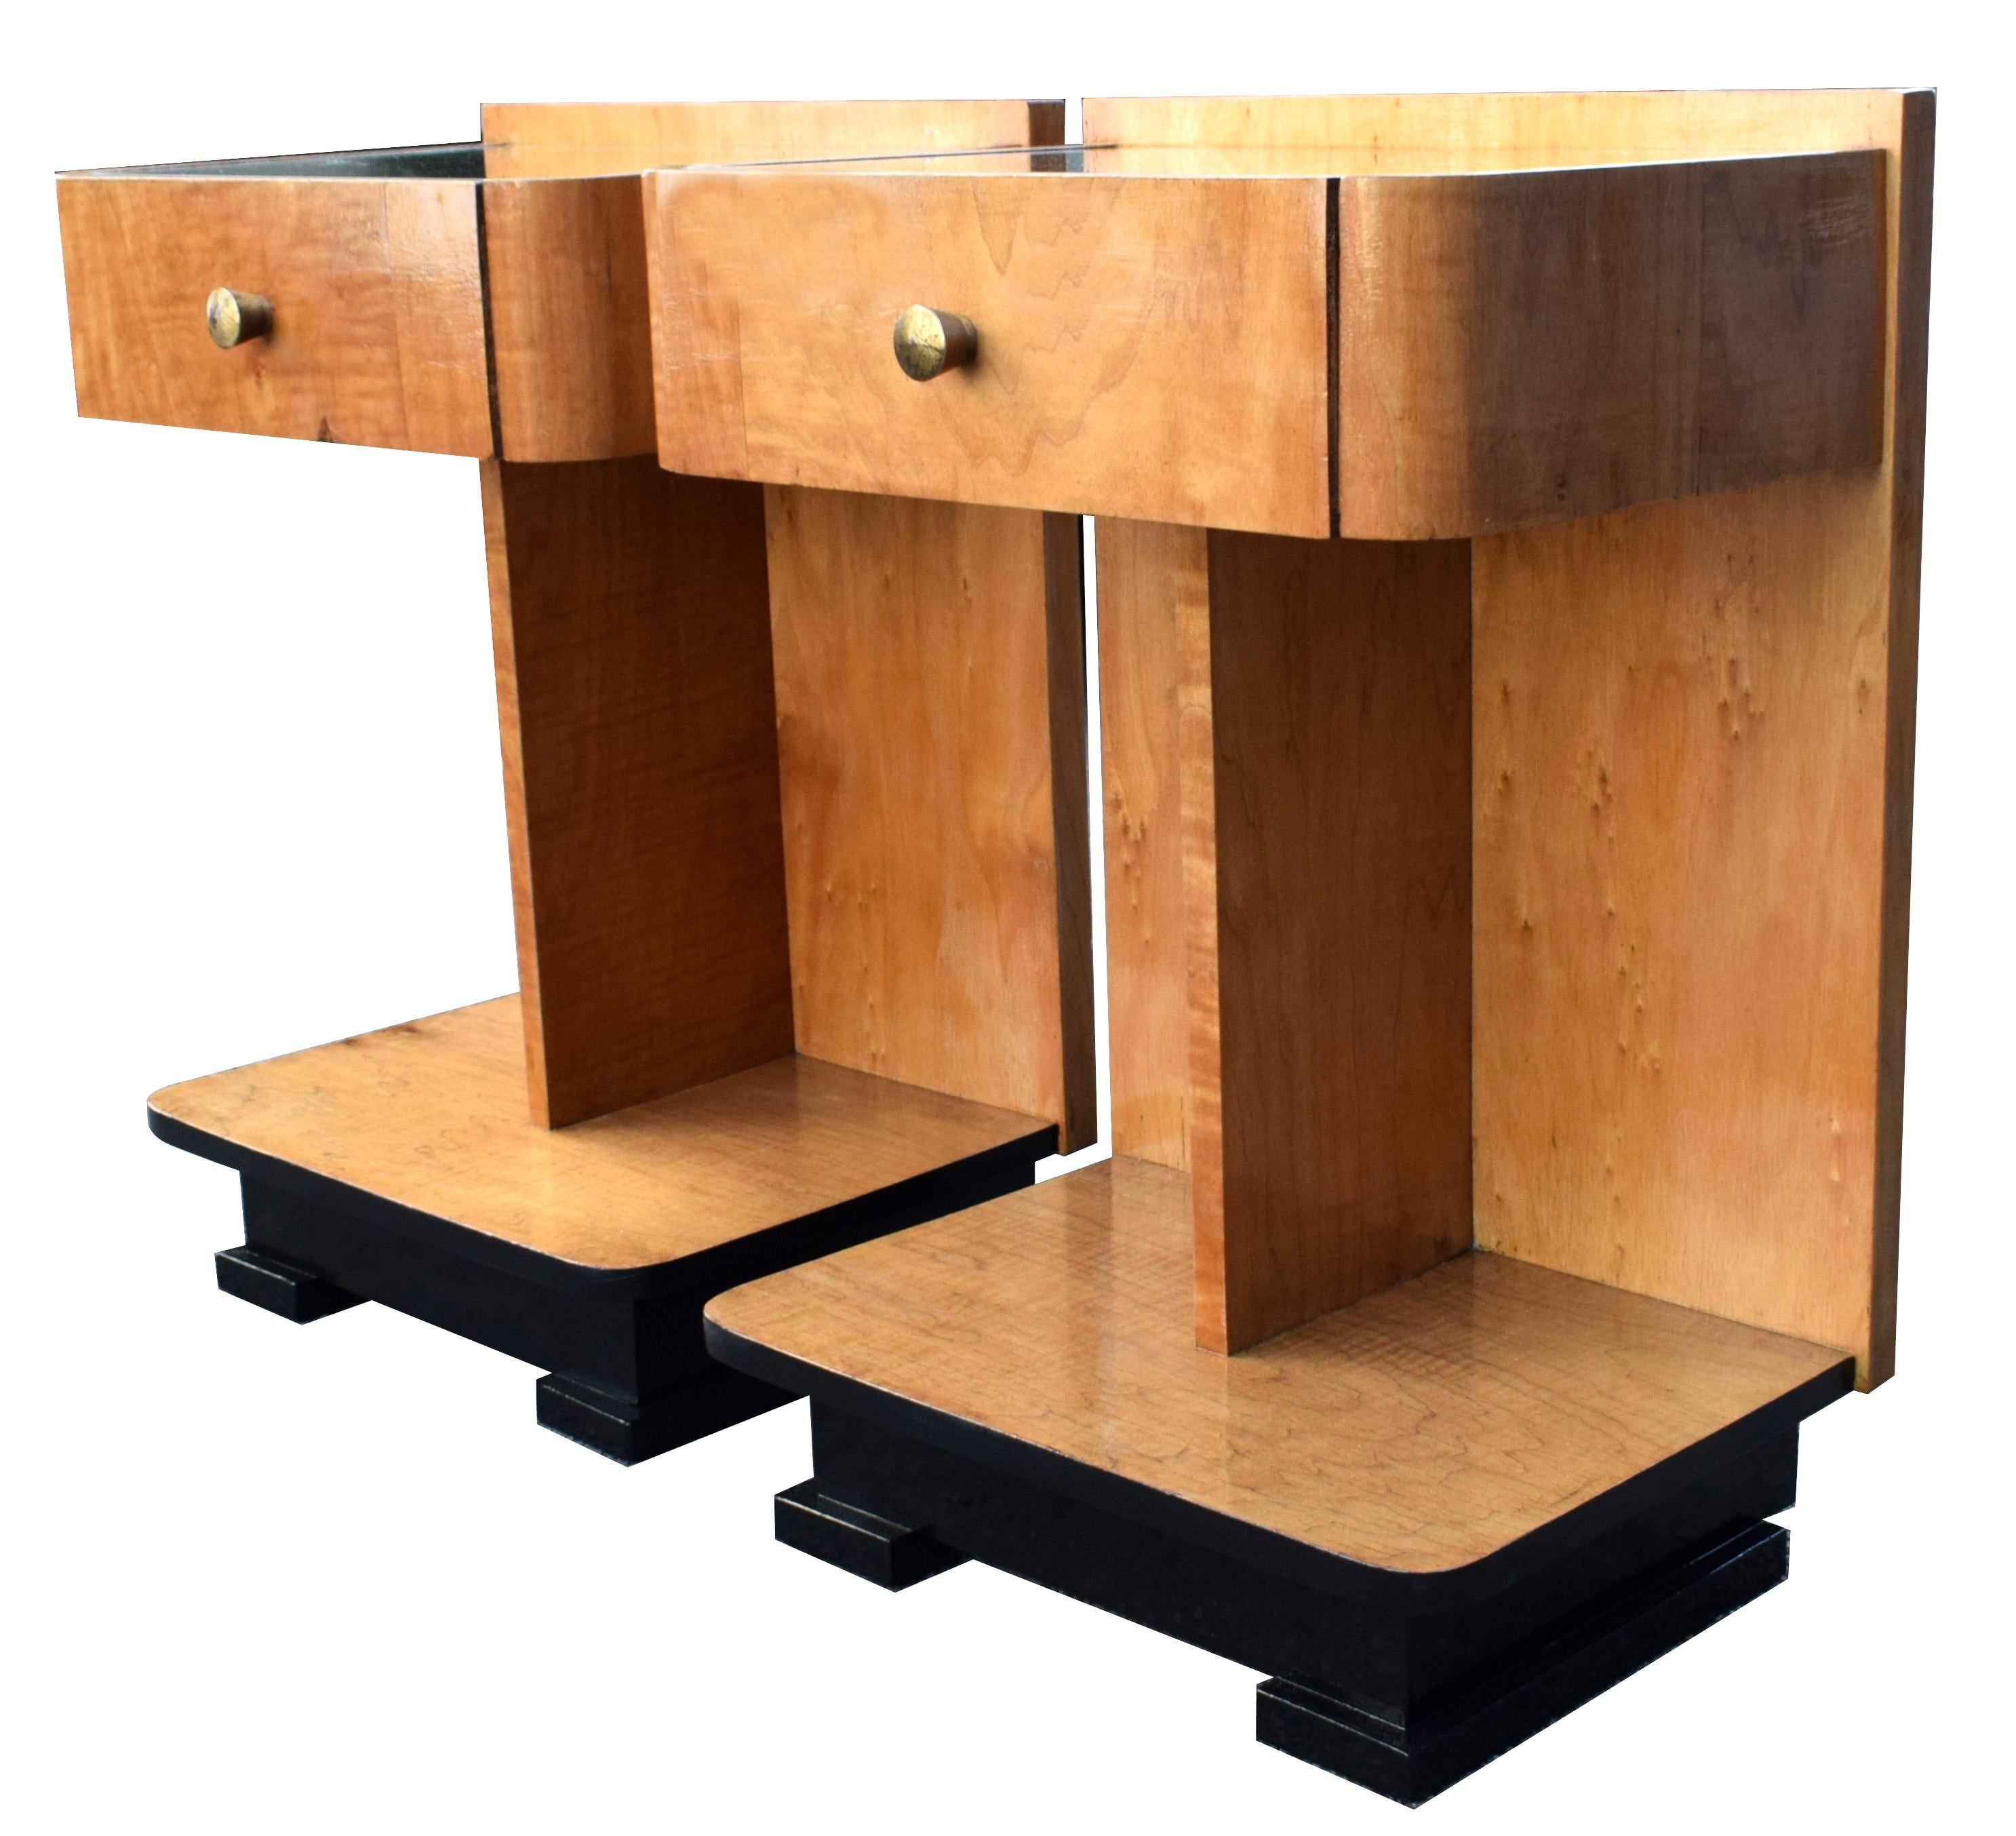 Matching pair of original 1930s Art Deco bedside nightstands. These have a great modernist feel and are an ideal size for modern use. They are mid tone blonde Beech veneer in colour so ideal for lighter or darker bedroom settings/ woods. Both have